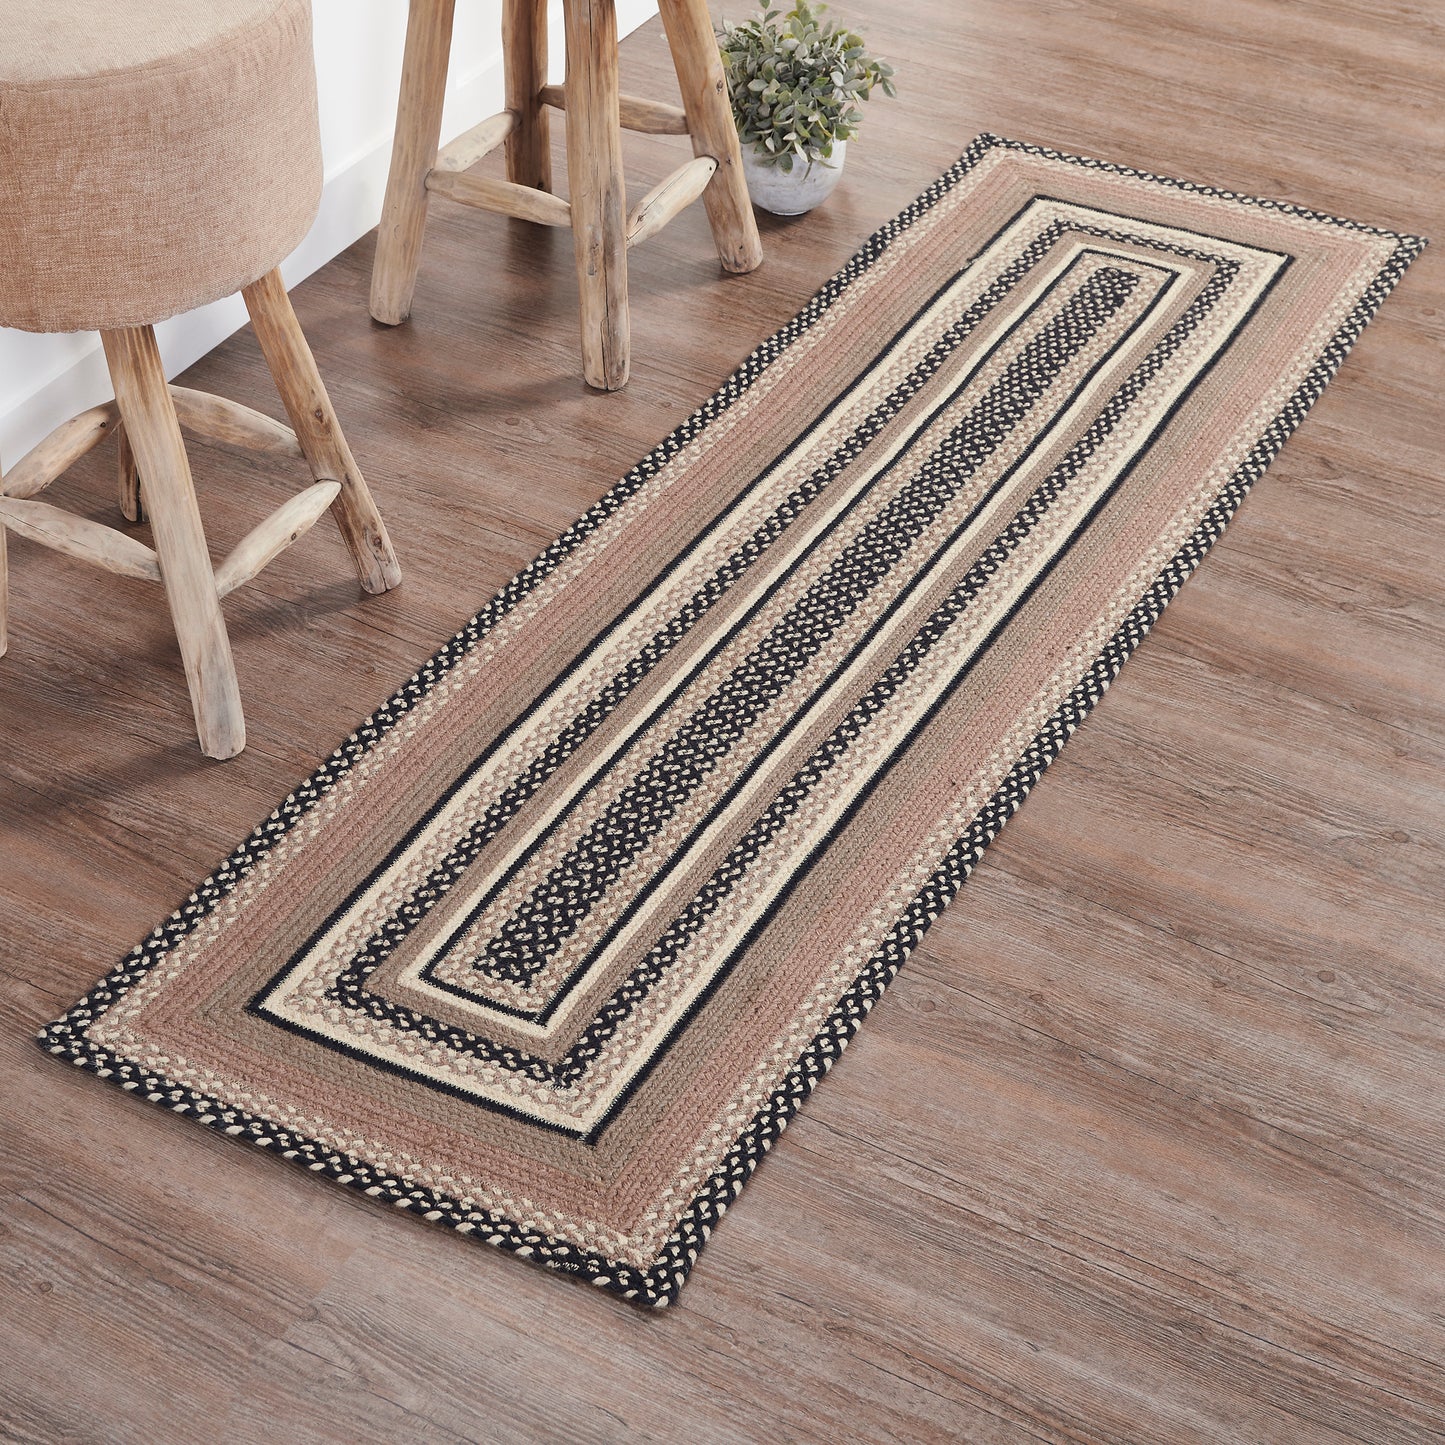 81458-Sawyer-Mill-Charcoal-Creme-Jute-Rug-Runner-Rect-w-Pad-24x78-image-4